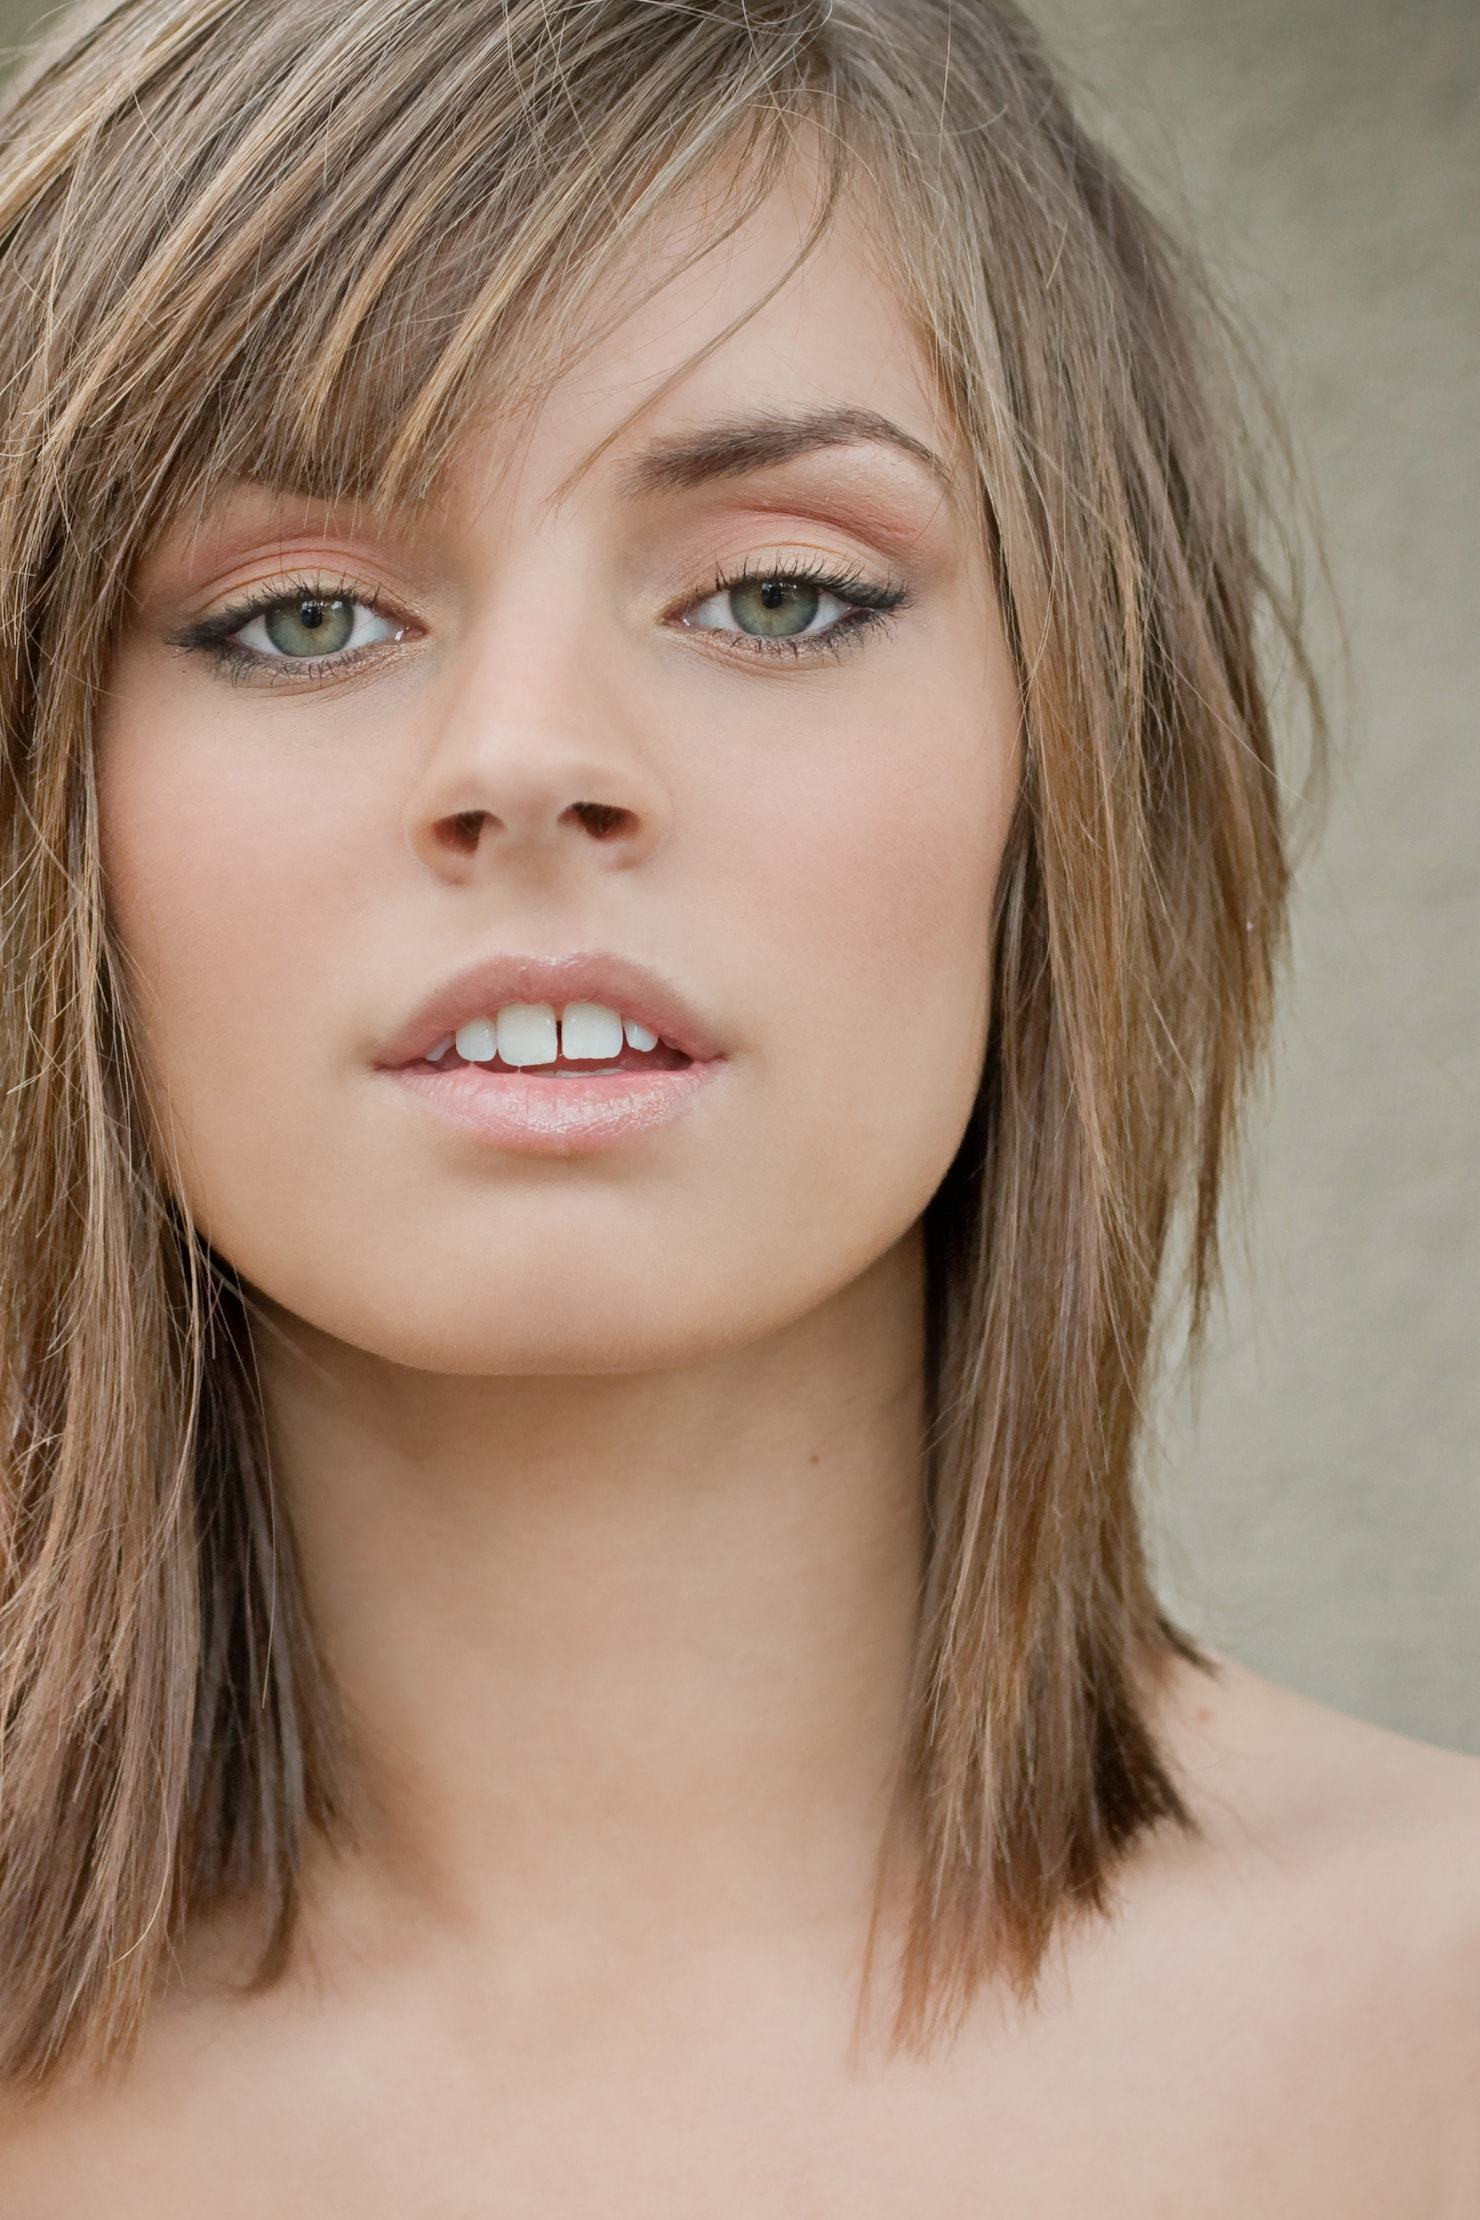 Medium Short Hairstyles With Bangs
 Short Bangs 18 Trendy Ways to Wear This Edgy Style